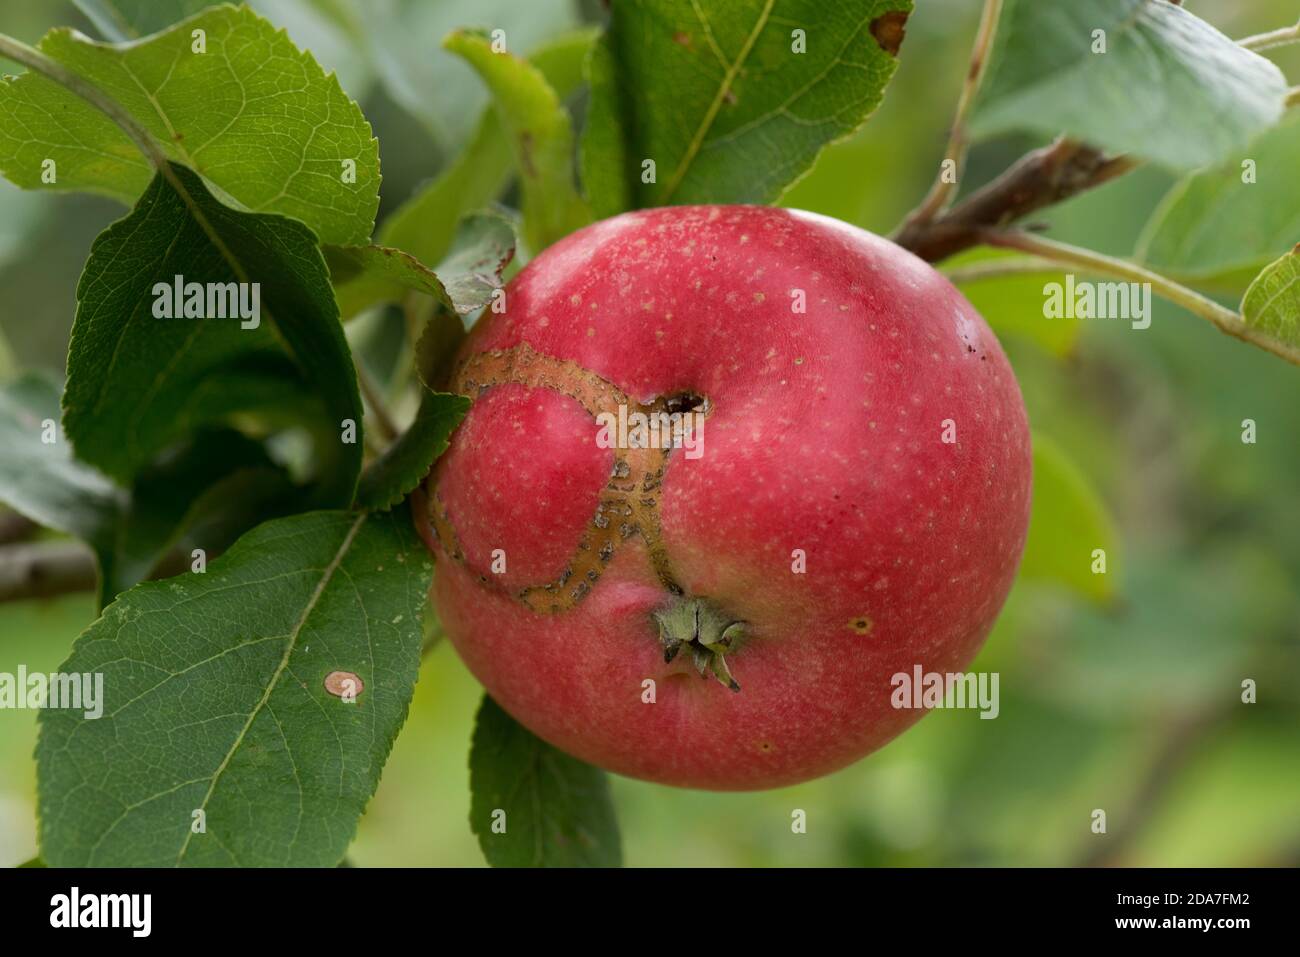 Apple sawfly (Holocampa testudinea) old feeding scarring on the surface of a ripe red Discovery apple fruit on the tree, Berkshire, August Stock Photo